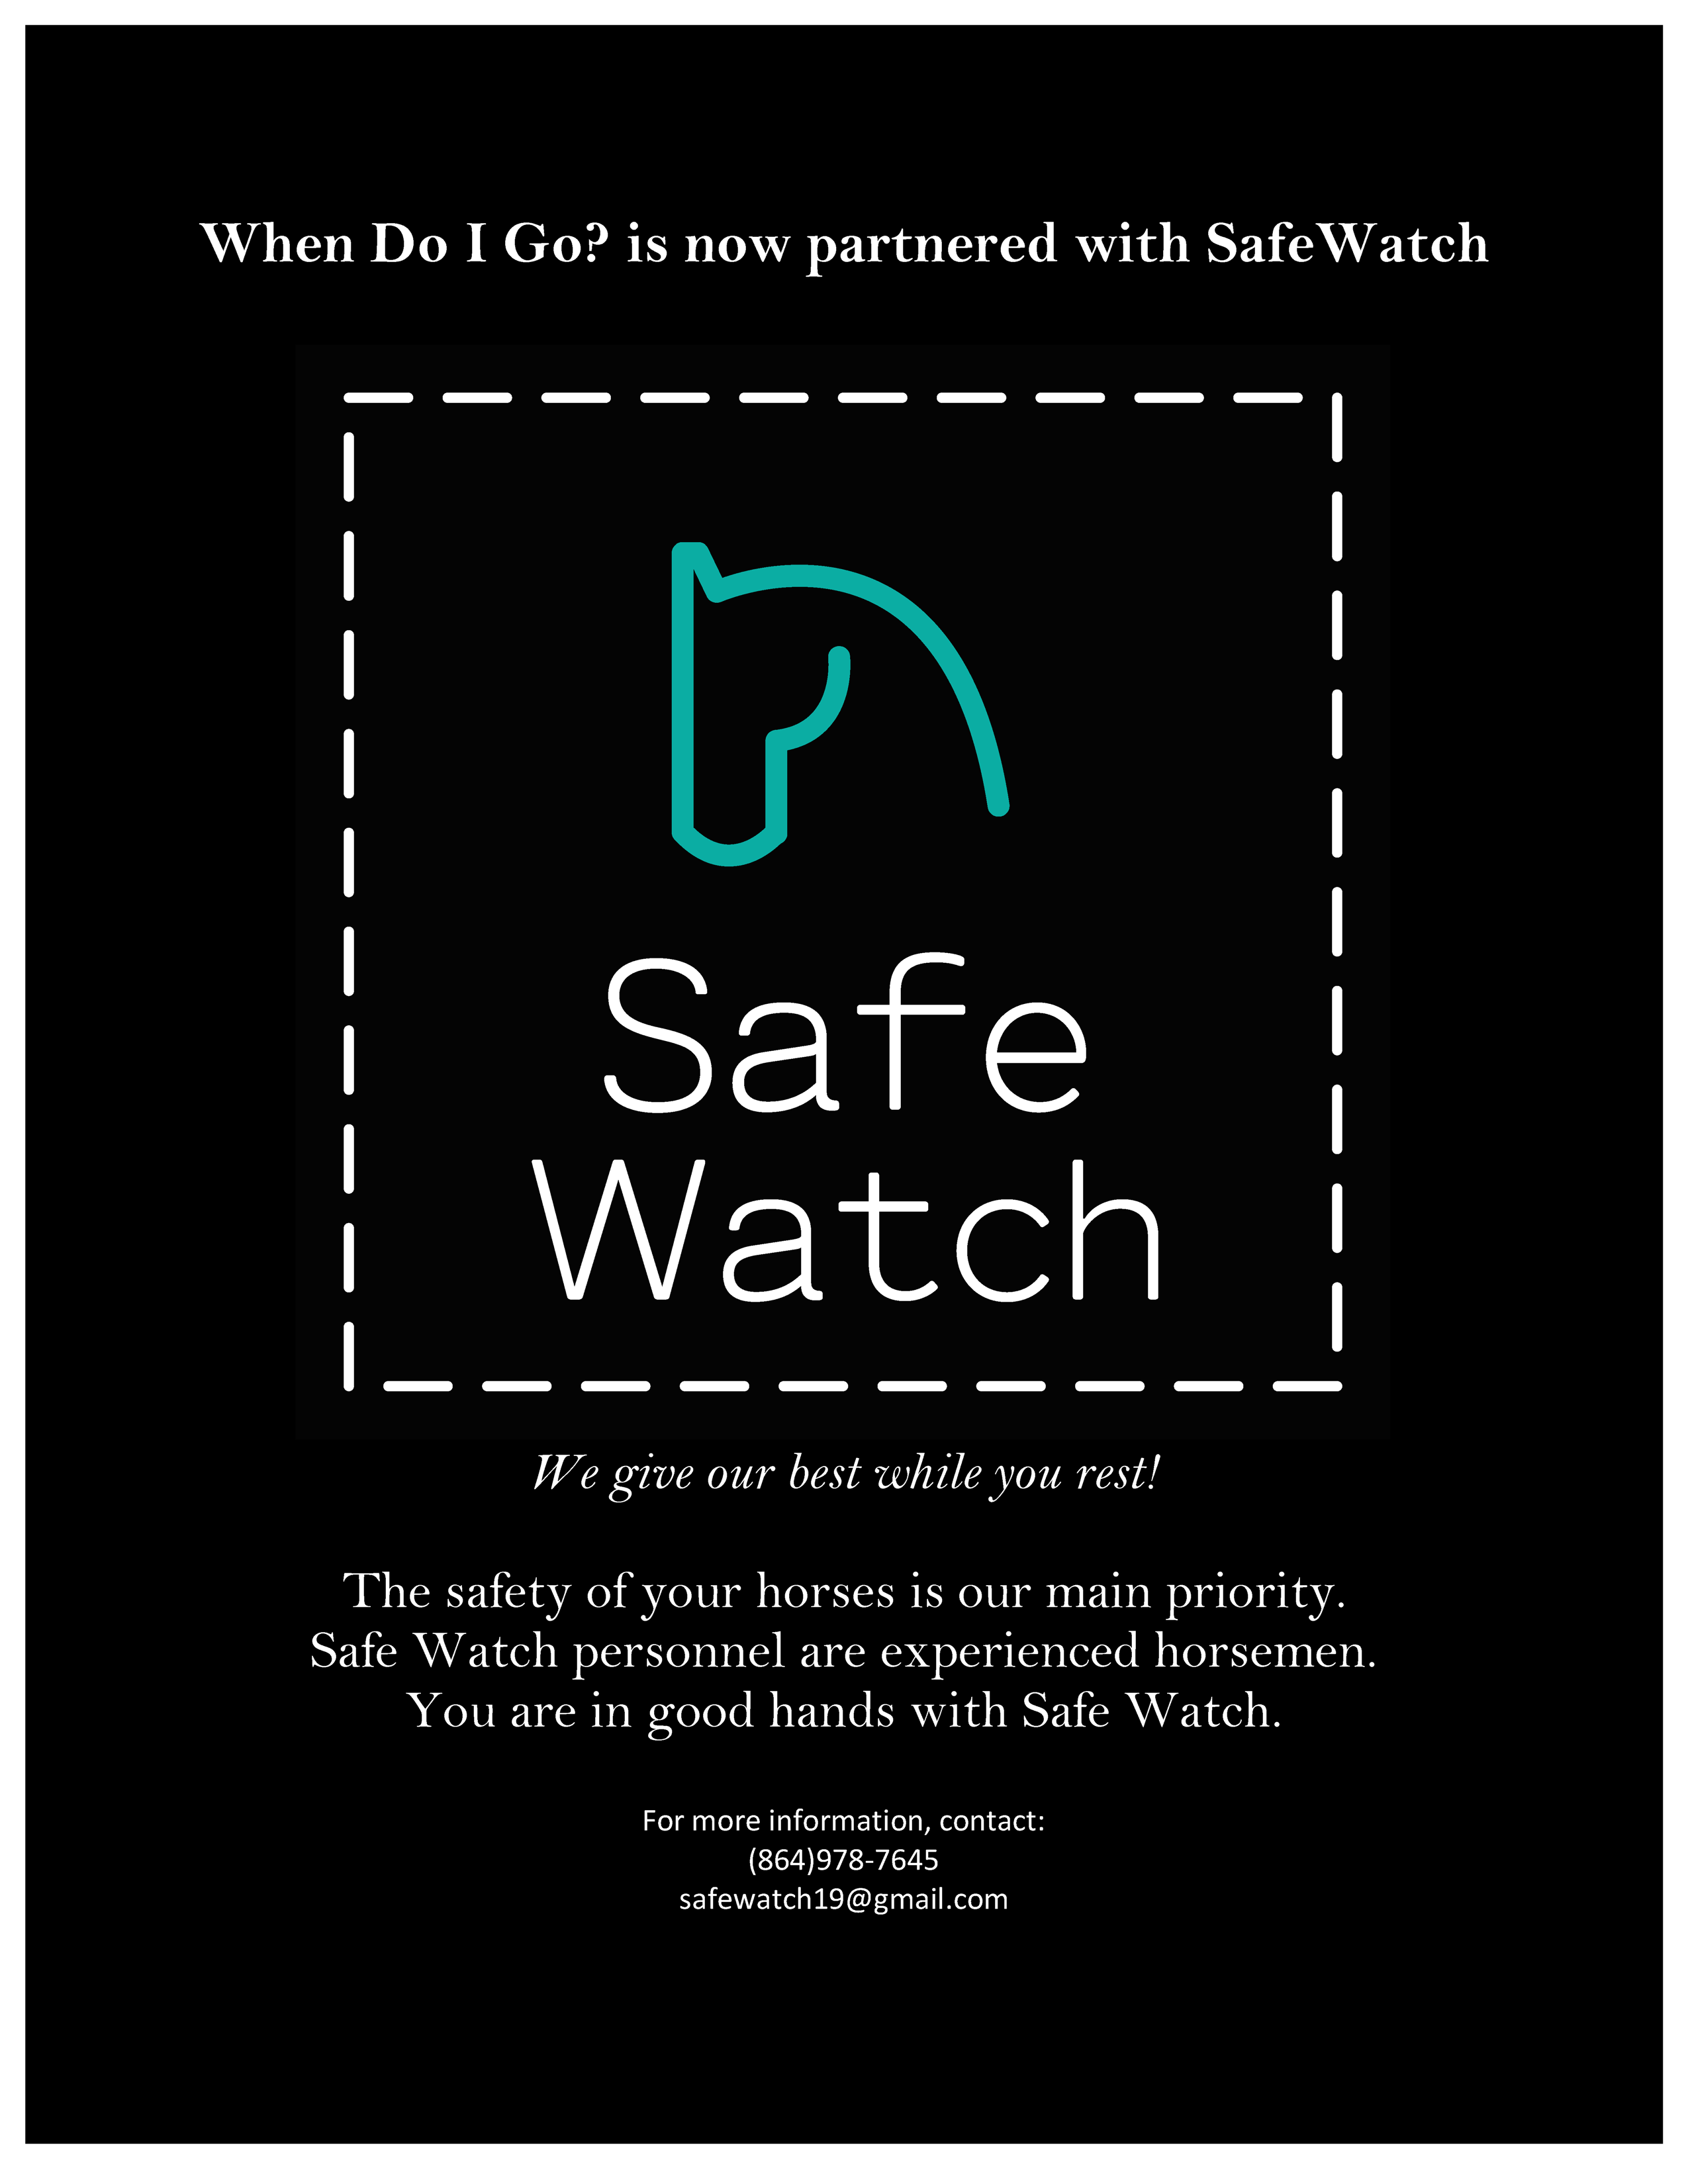 Safe-Watch-When-Do-I-Go-Page. 